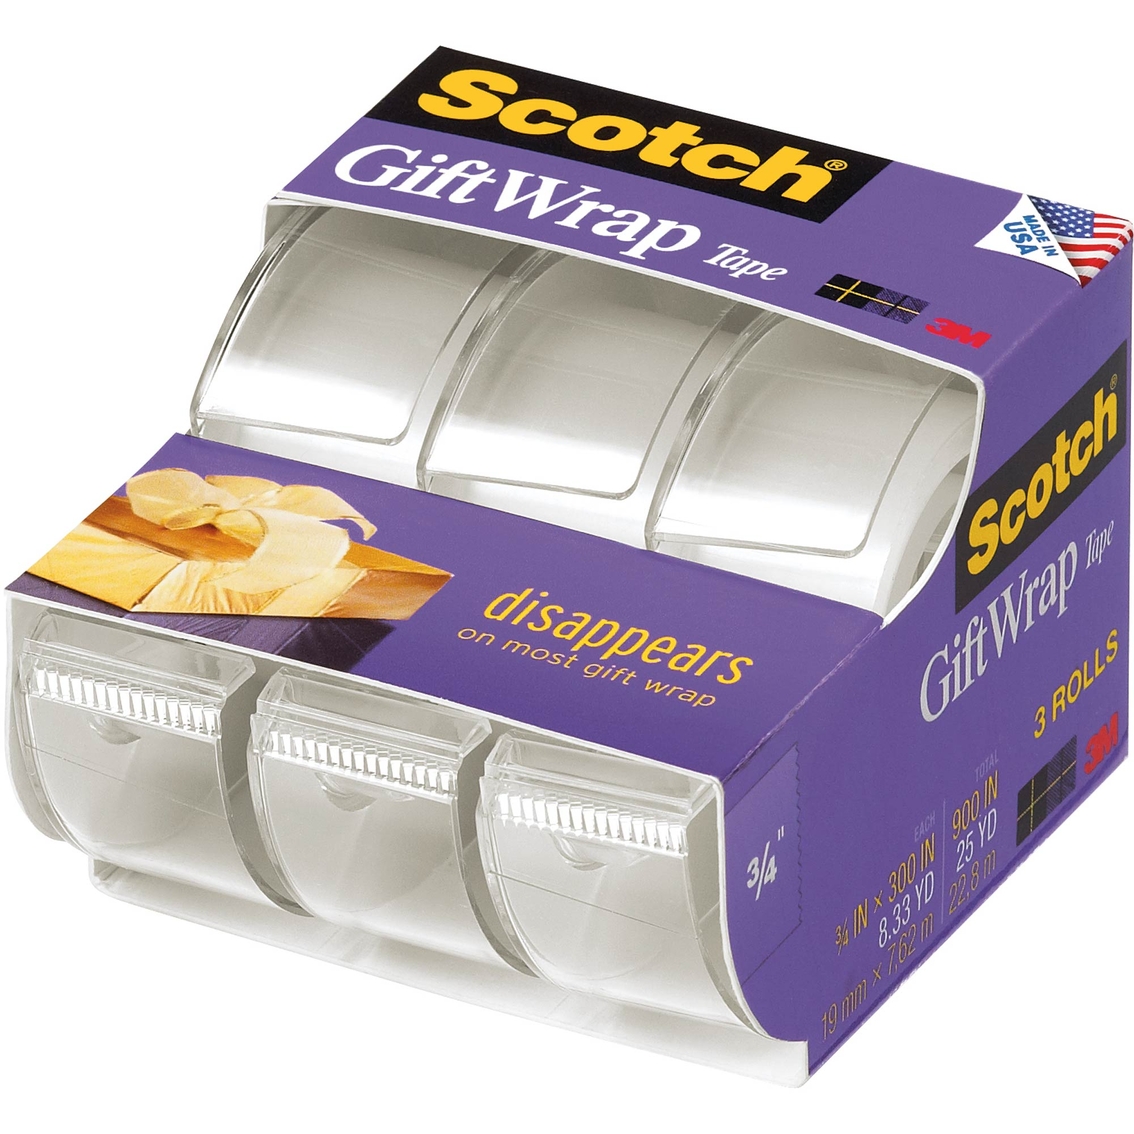 Scotch Gift Wrap Transparent Tape 3 Pk., Tape, Adhesives & Fasteners, Household